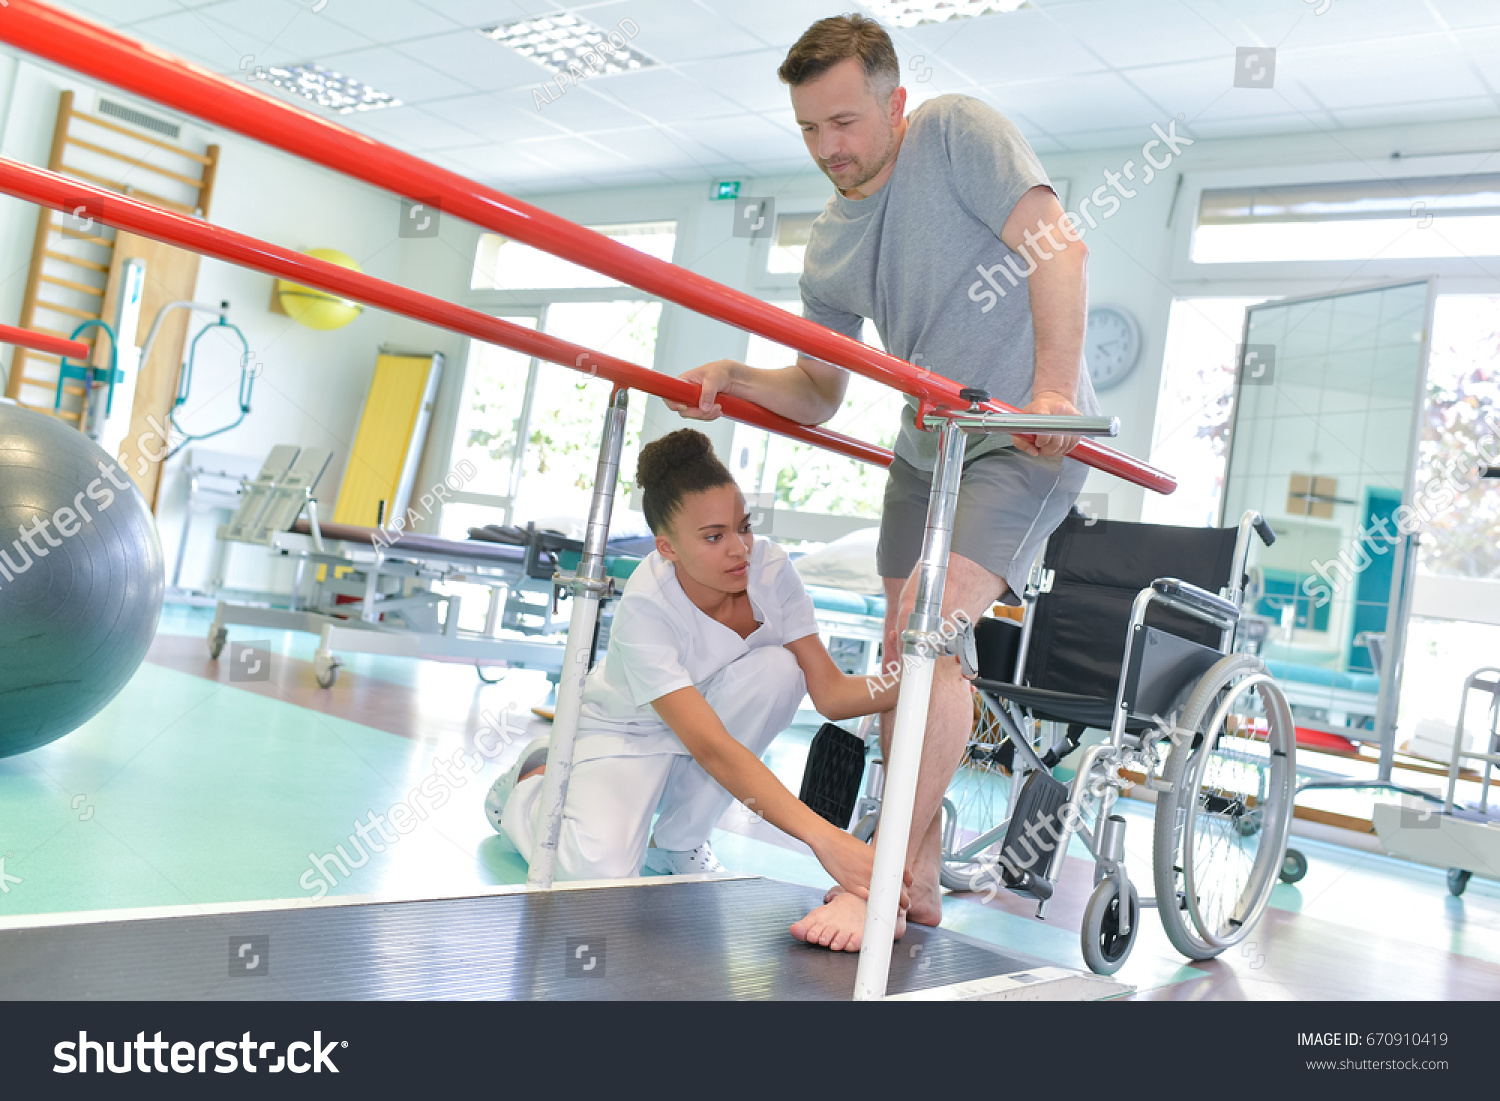 Occupational therapist helping patient to walk #670910419